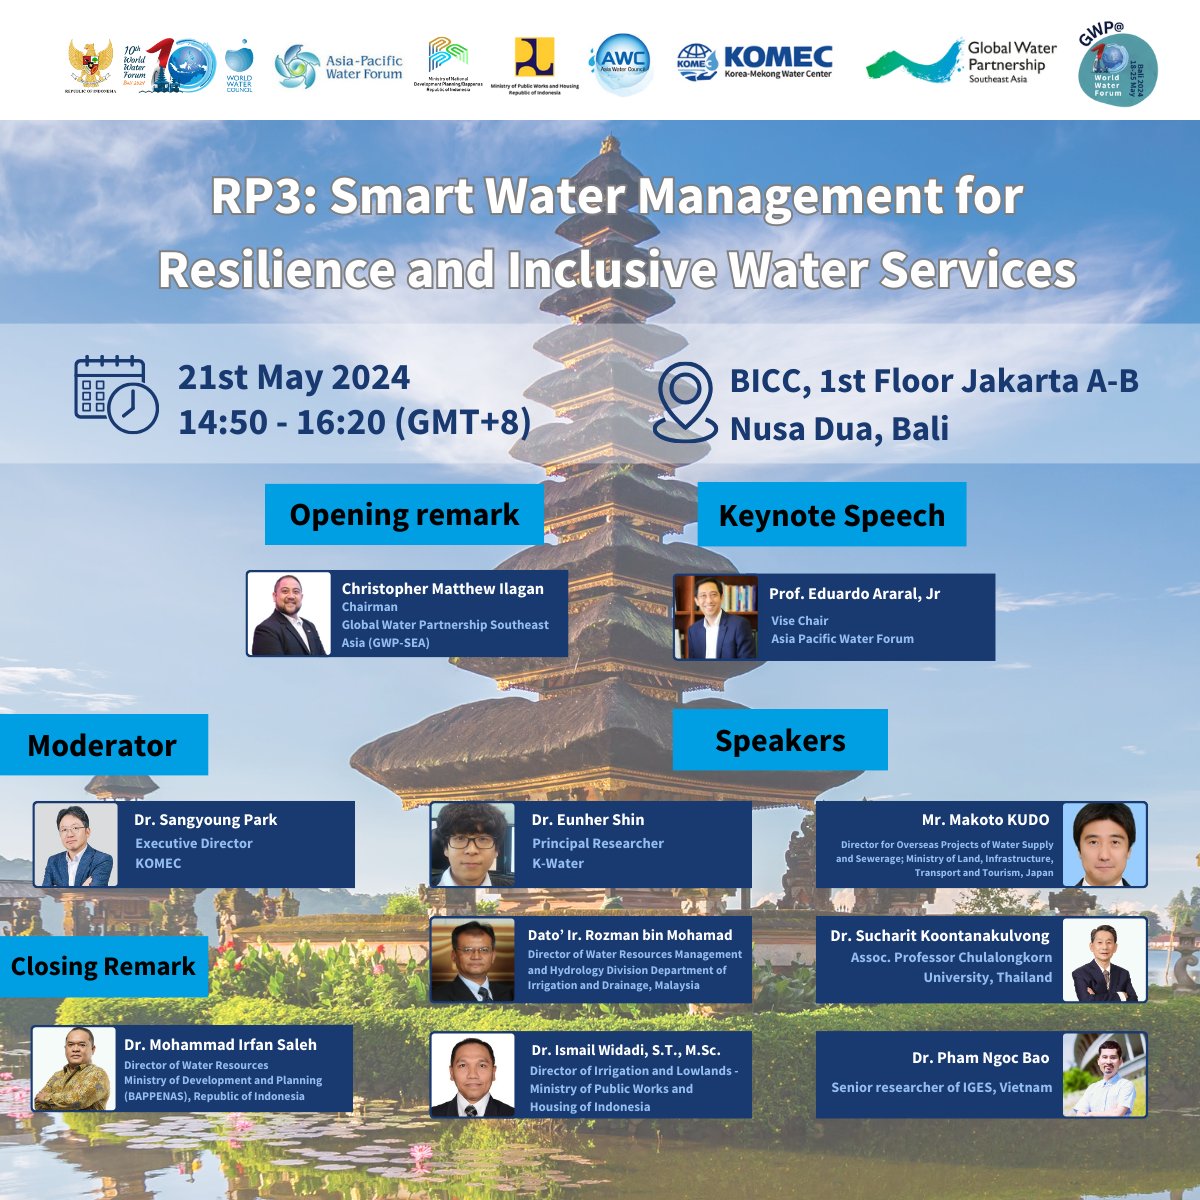 Join us at the 10th World Water Forum for an enlightening session on Smart Water Management! Learn from experienced speakers as they share exemplary practices in navigating water challenges. #WorldWaterForum #WaterforSharedProsperity #SmartWaterManagement